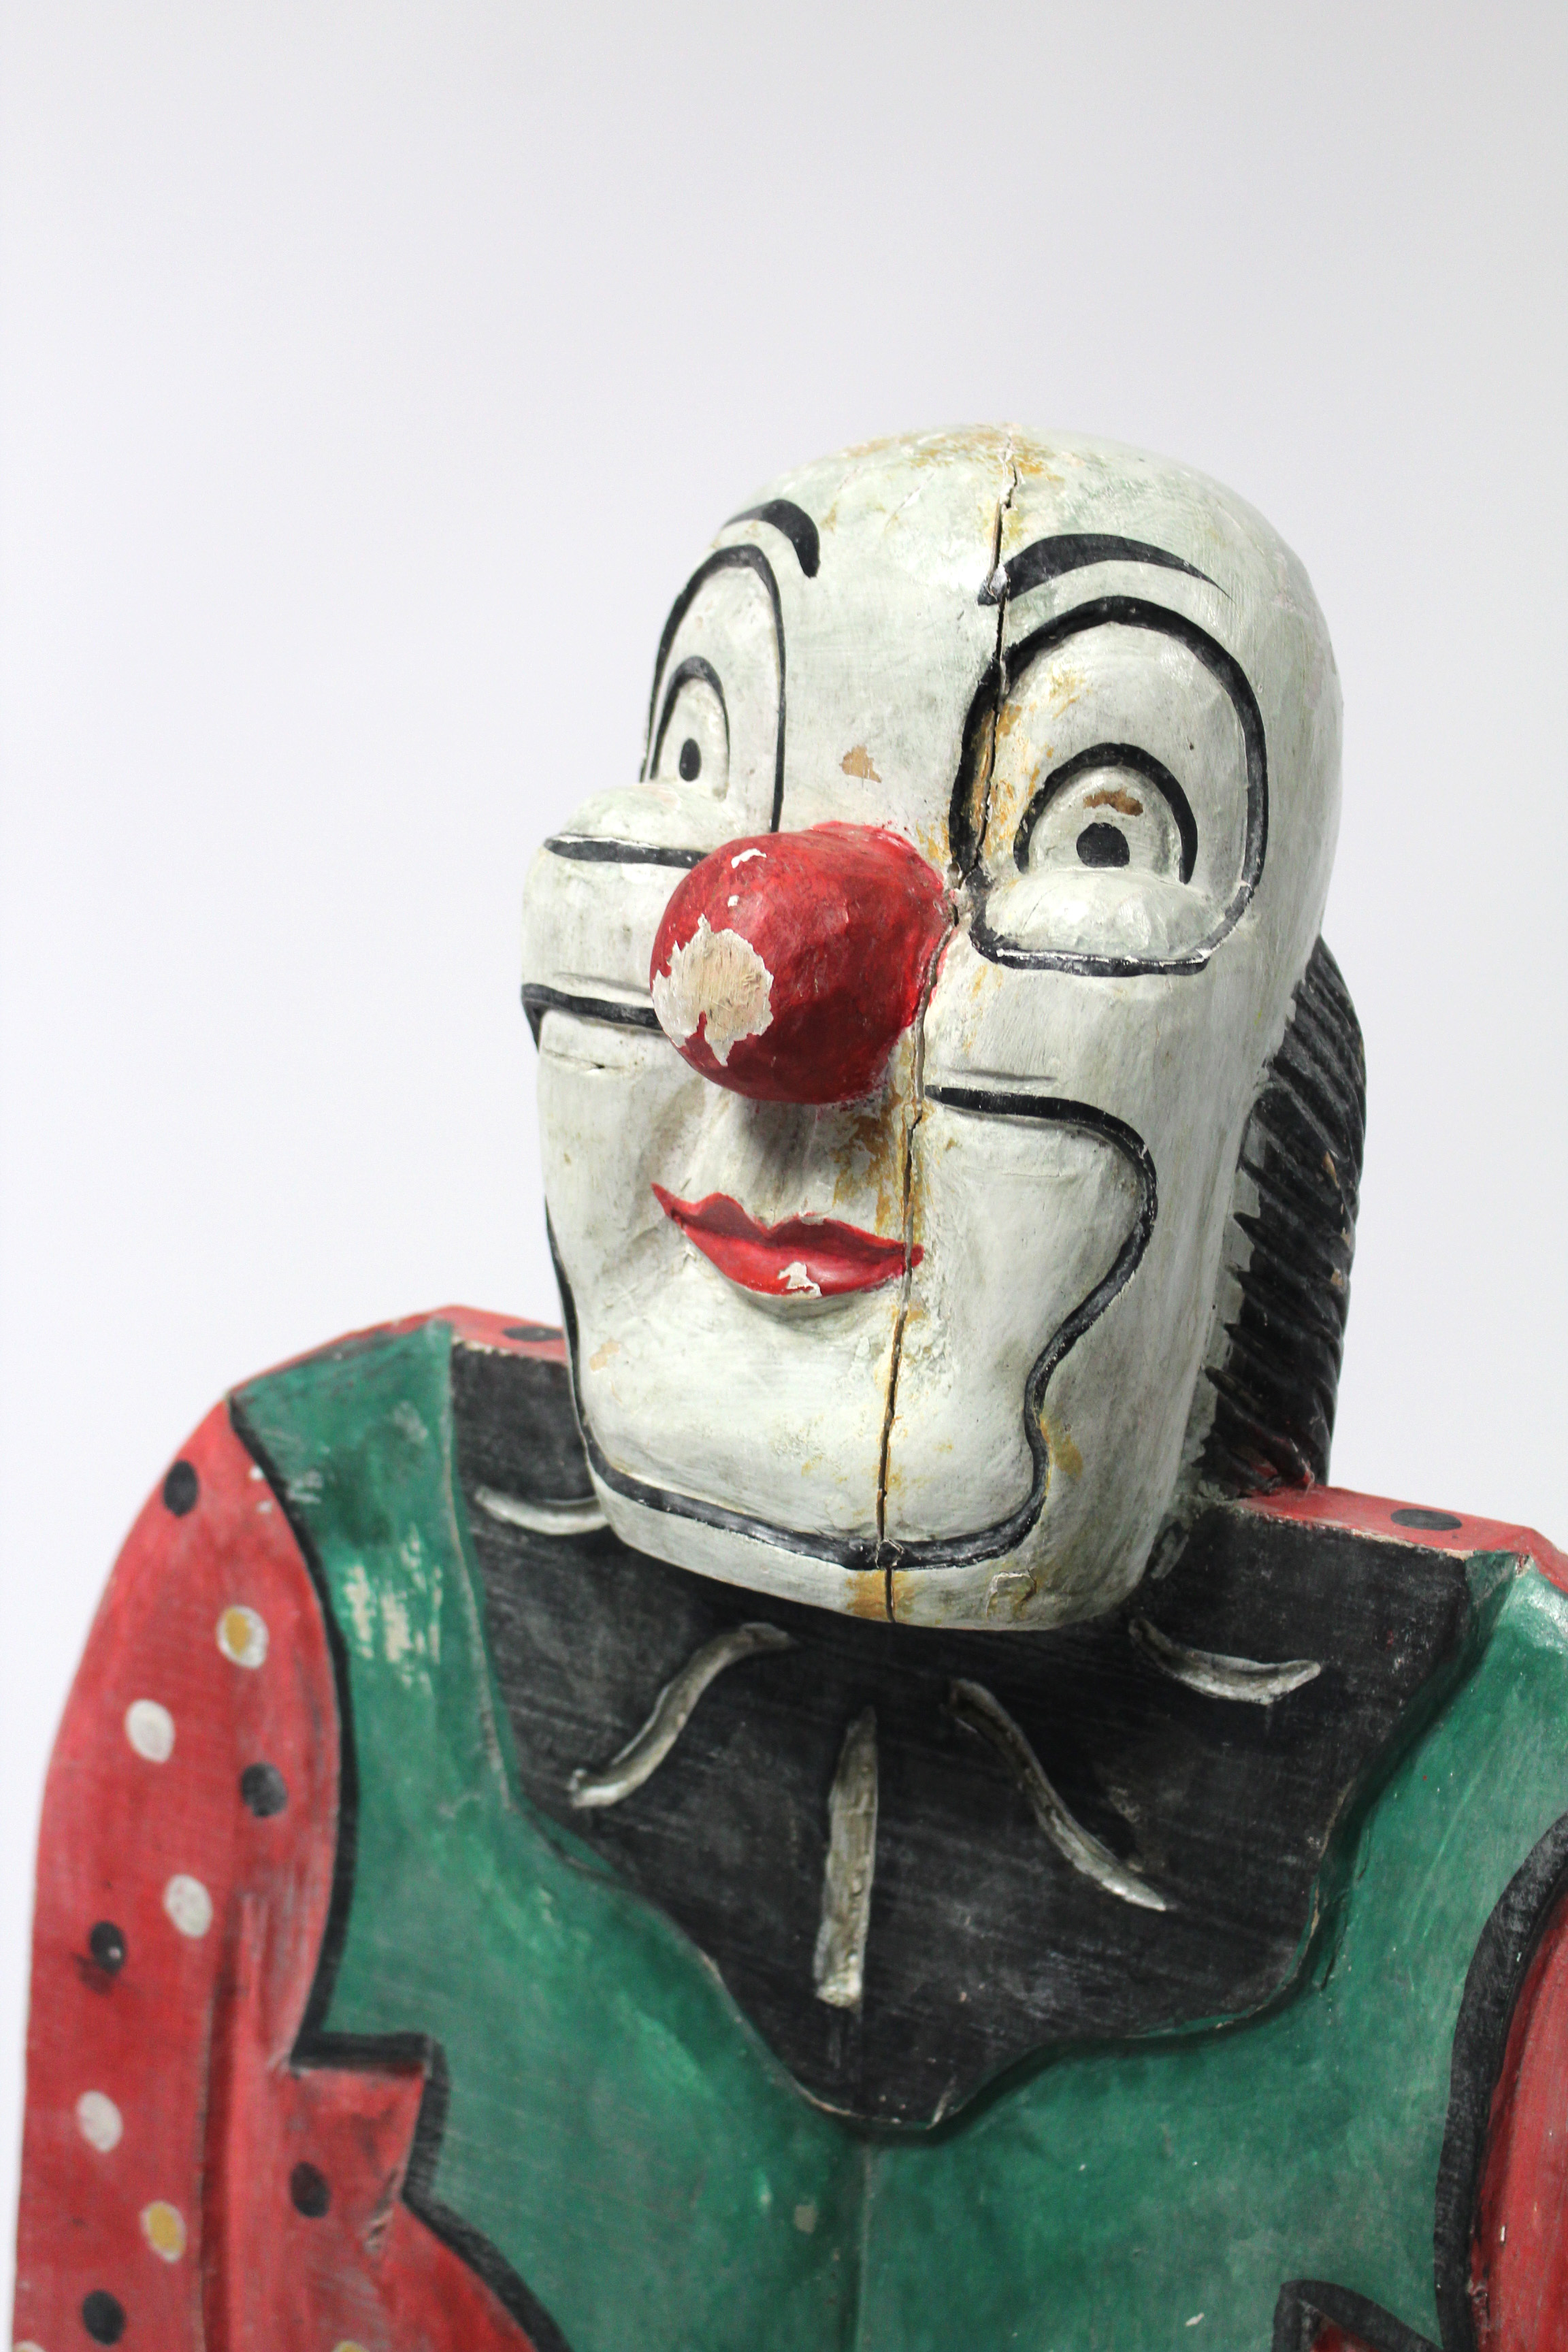 AN EARLY/MID 20th CENTURY PAINTED WOODEN NOVELTY CIRCUS/FAIRGROUND “CLOWN” CHAIR, 42½” HIGH. - Image 4 of 7